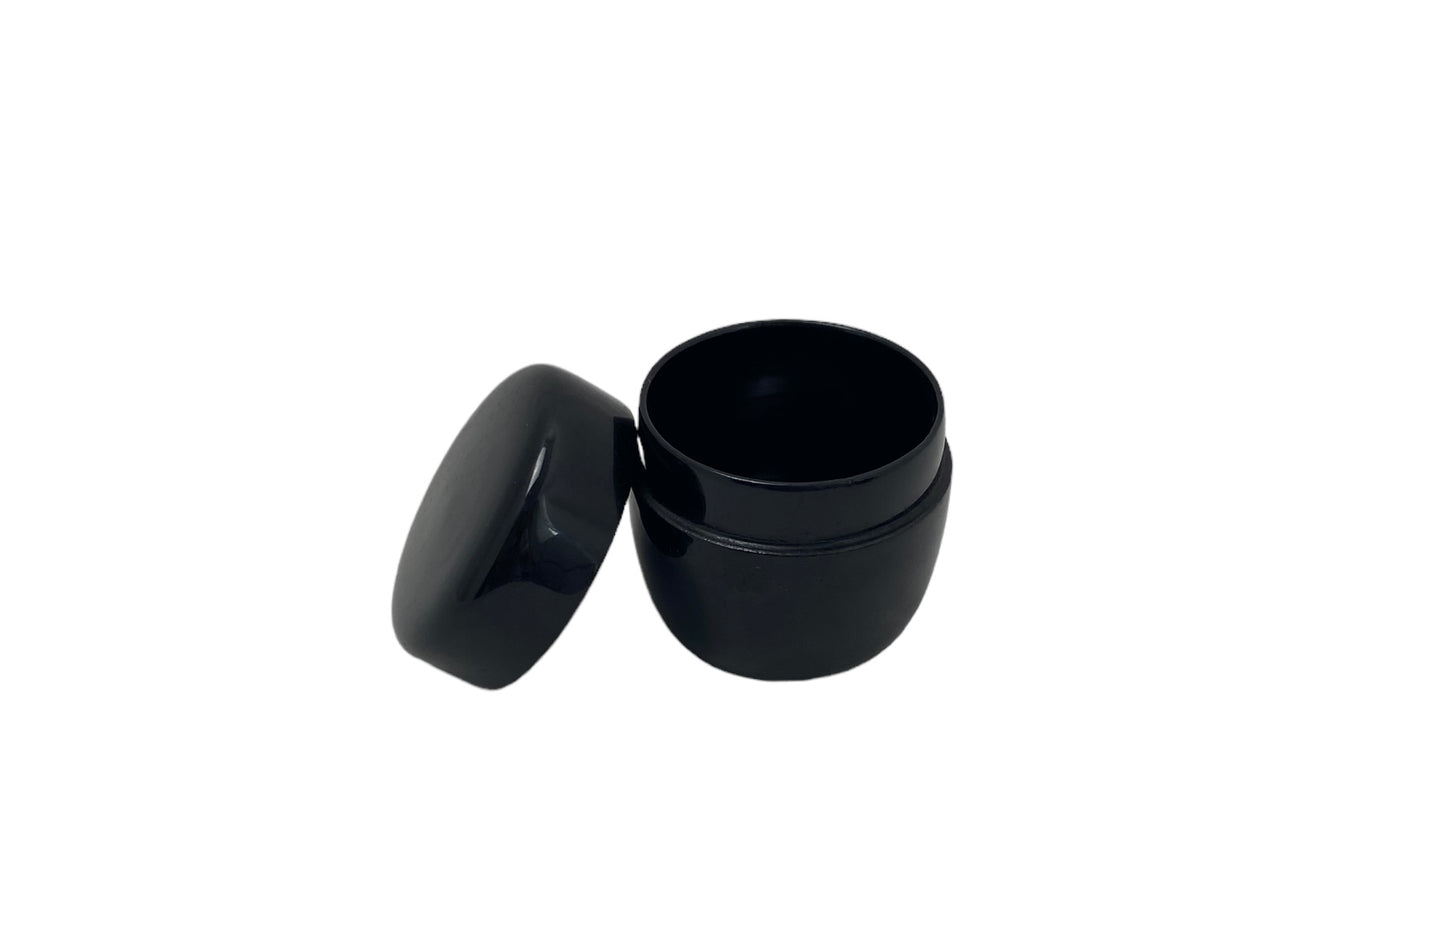 Set of 2 black NATSUME.(Container for serving powdered tea in tea ceremonies.)